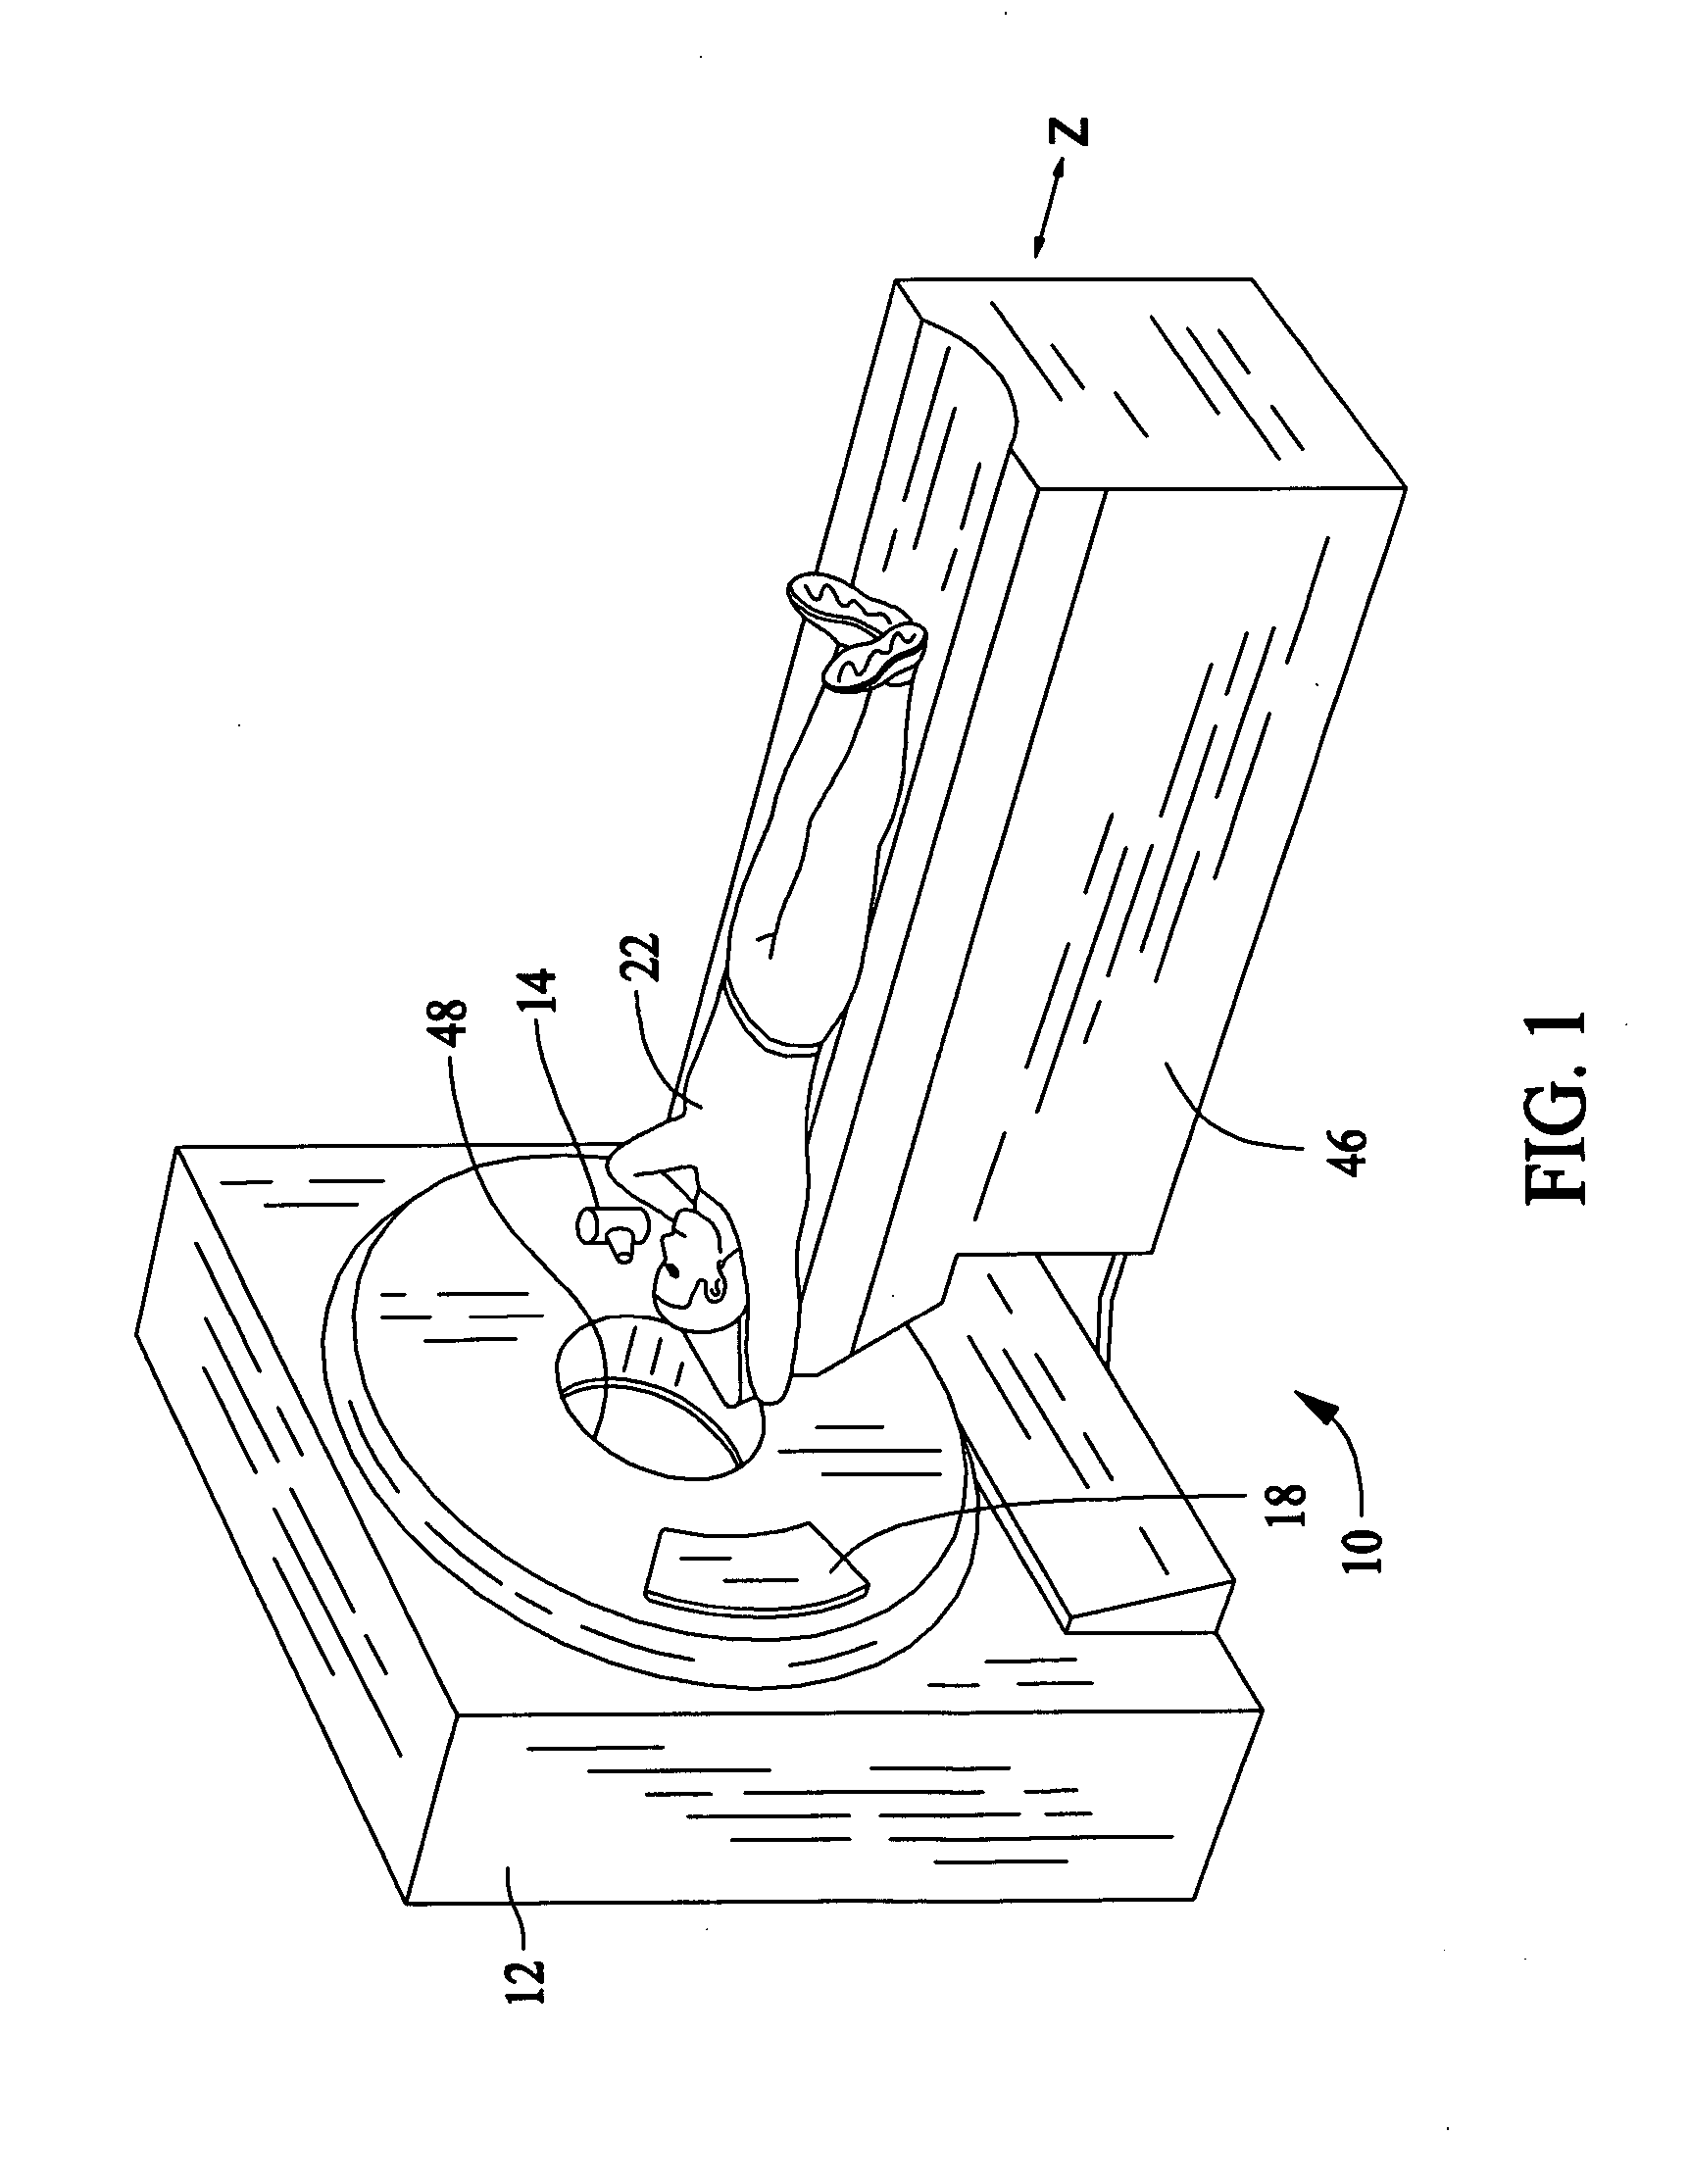 Method and system for automatically determining regions in a scanned object